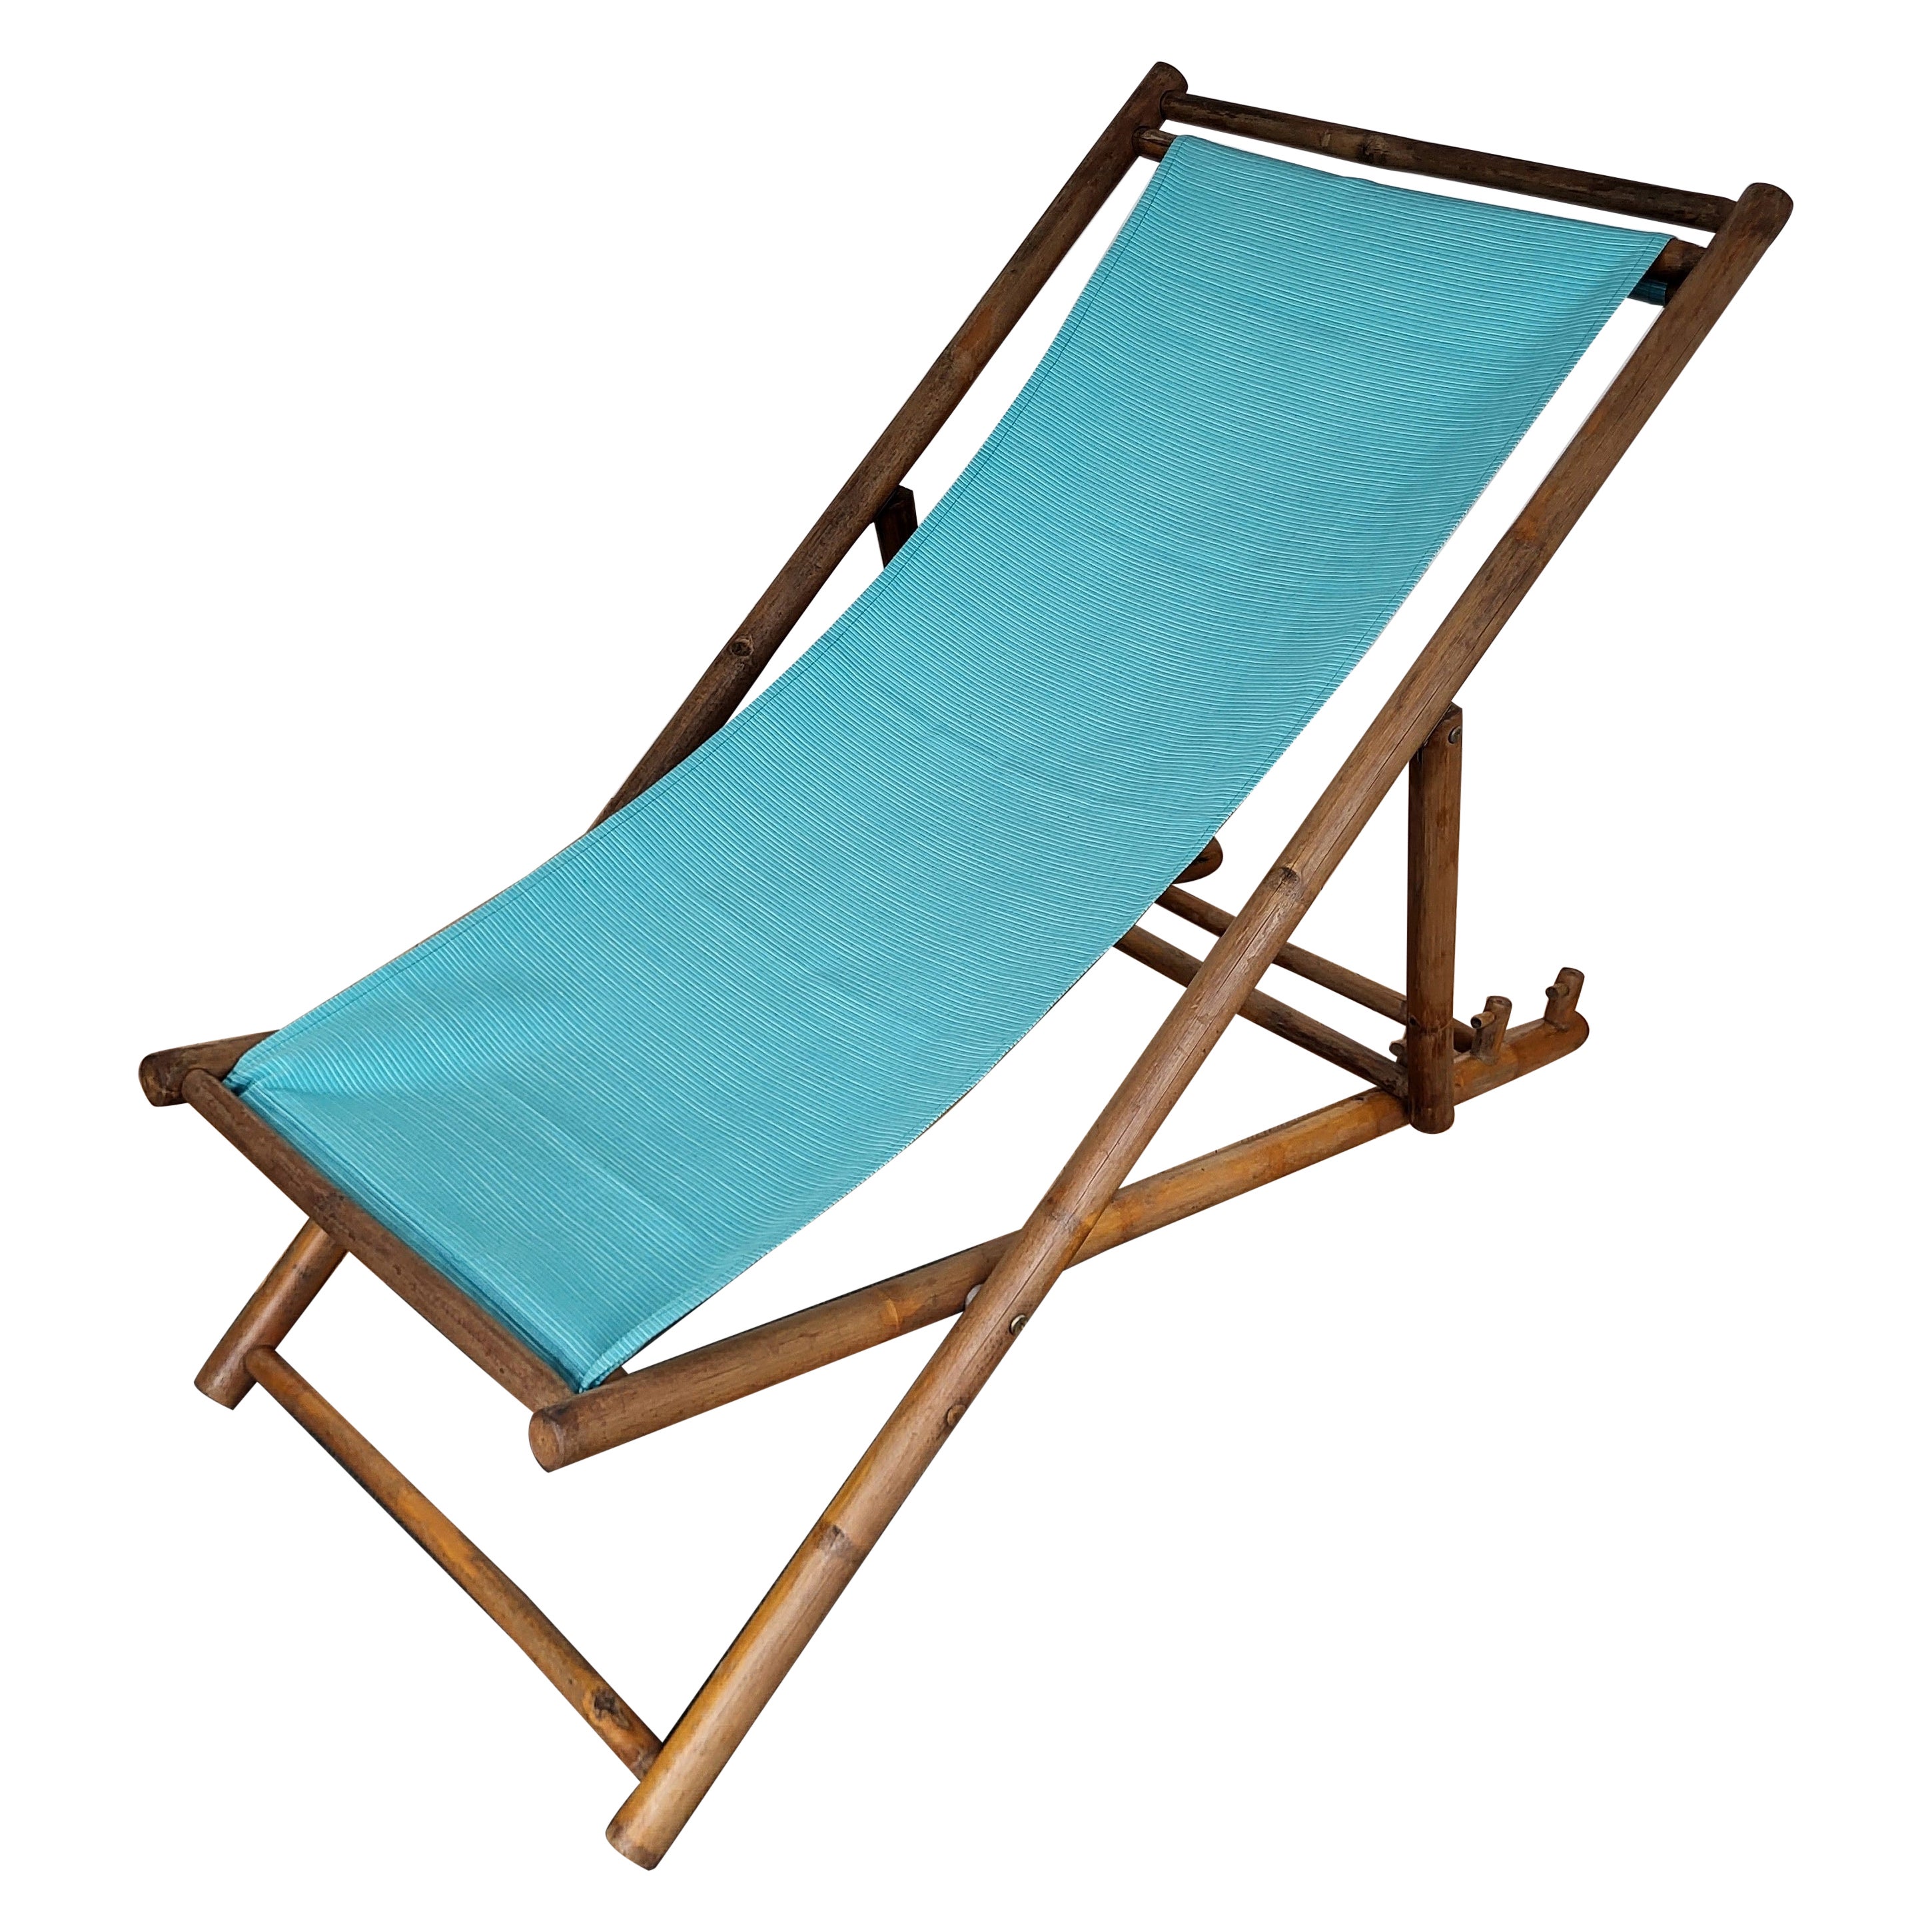 Transat Folding Deck Chair Patio Lounger, Chaise Longue, Bambo Wood and Fabric For Sale